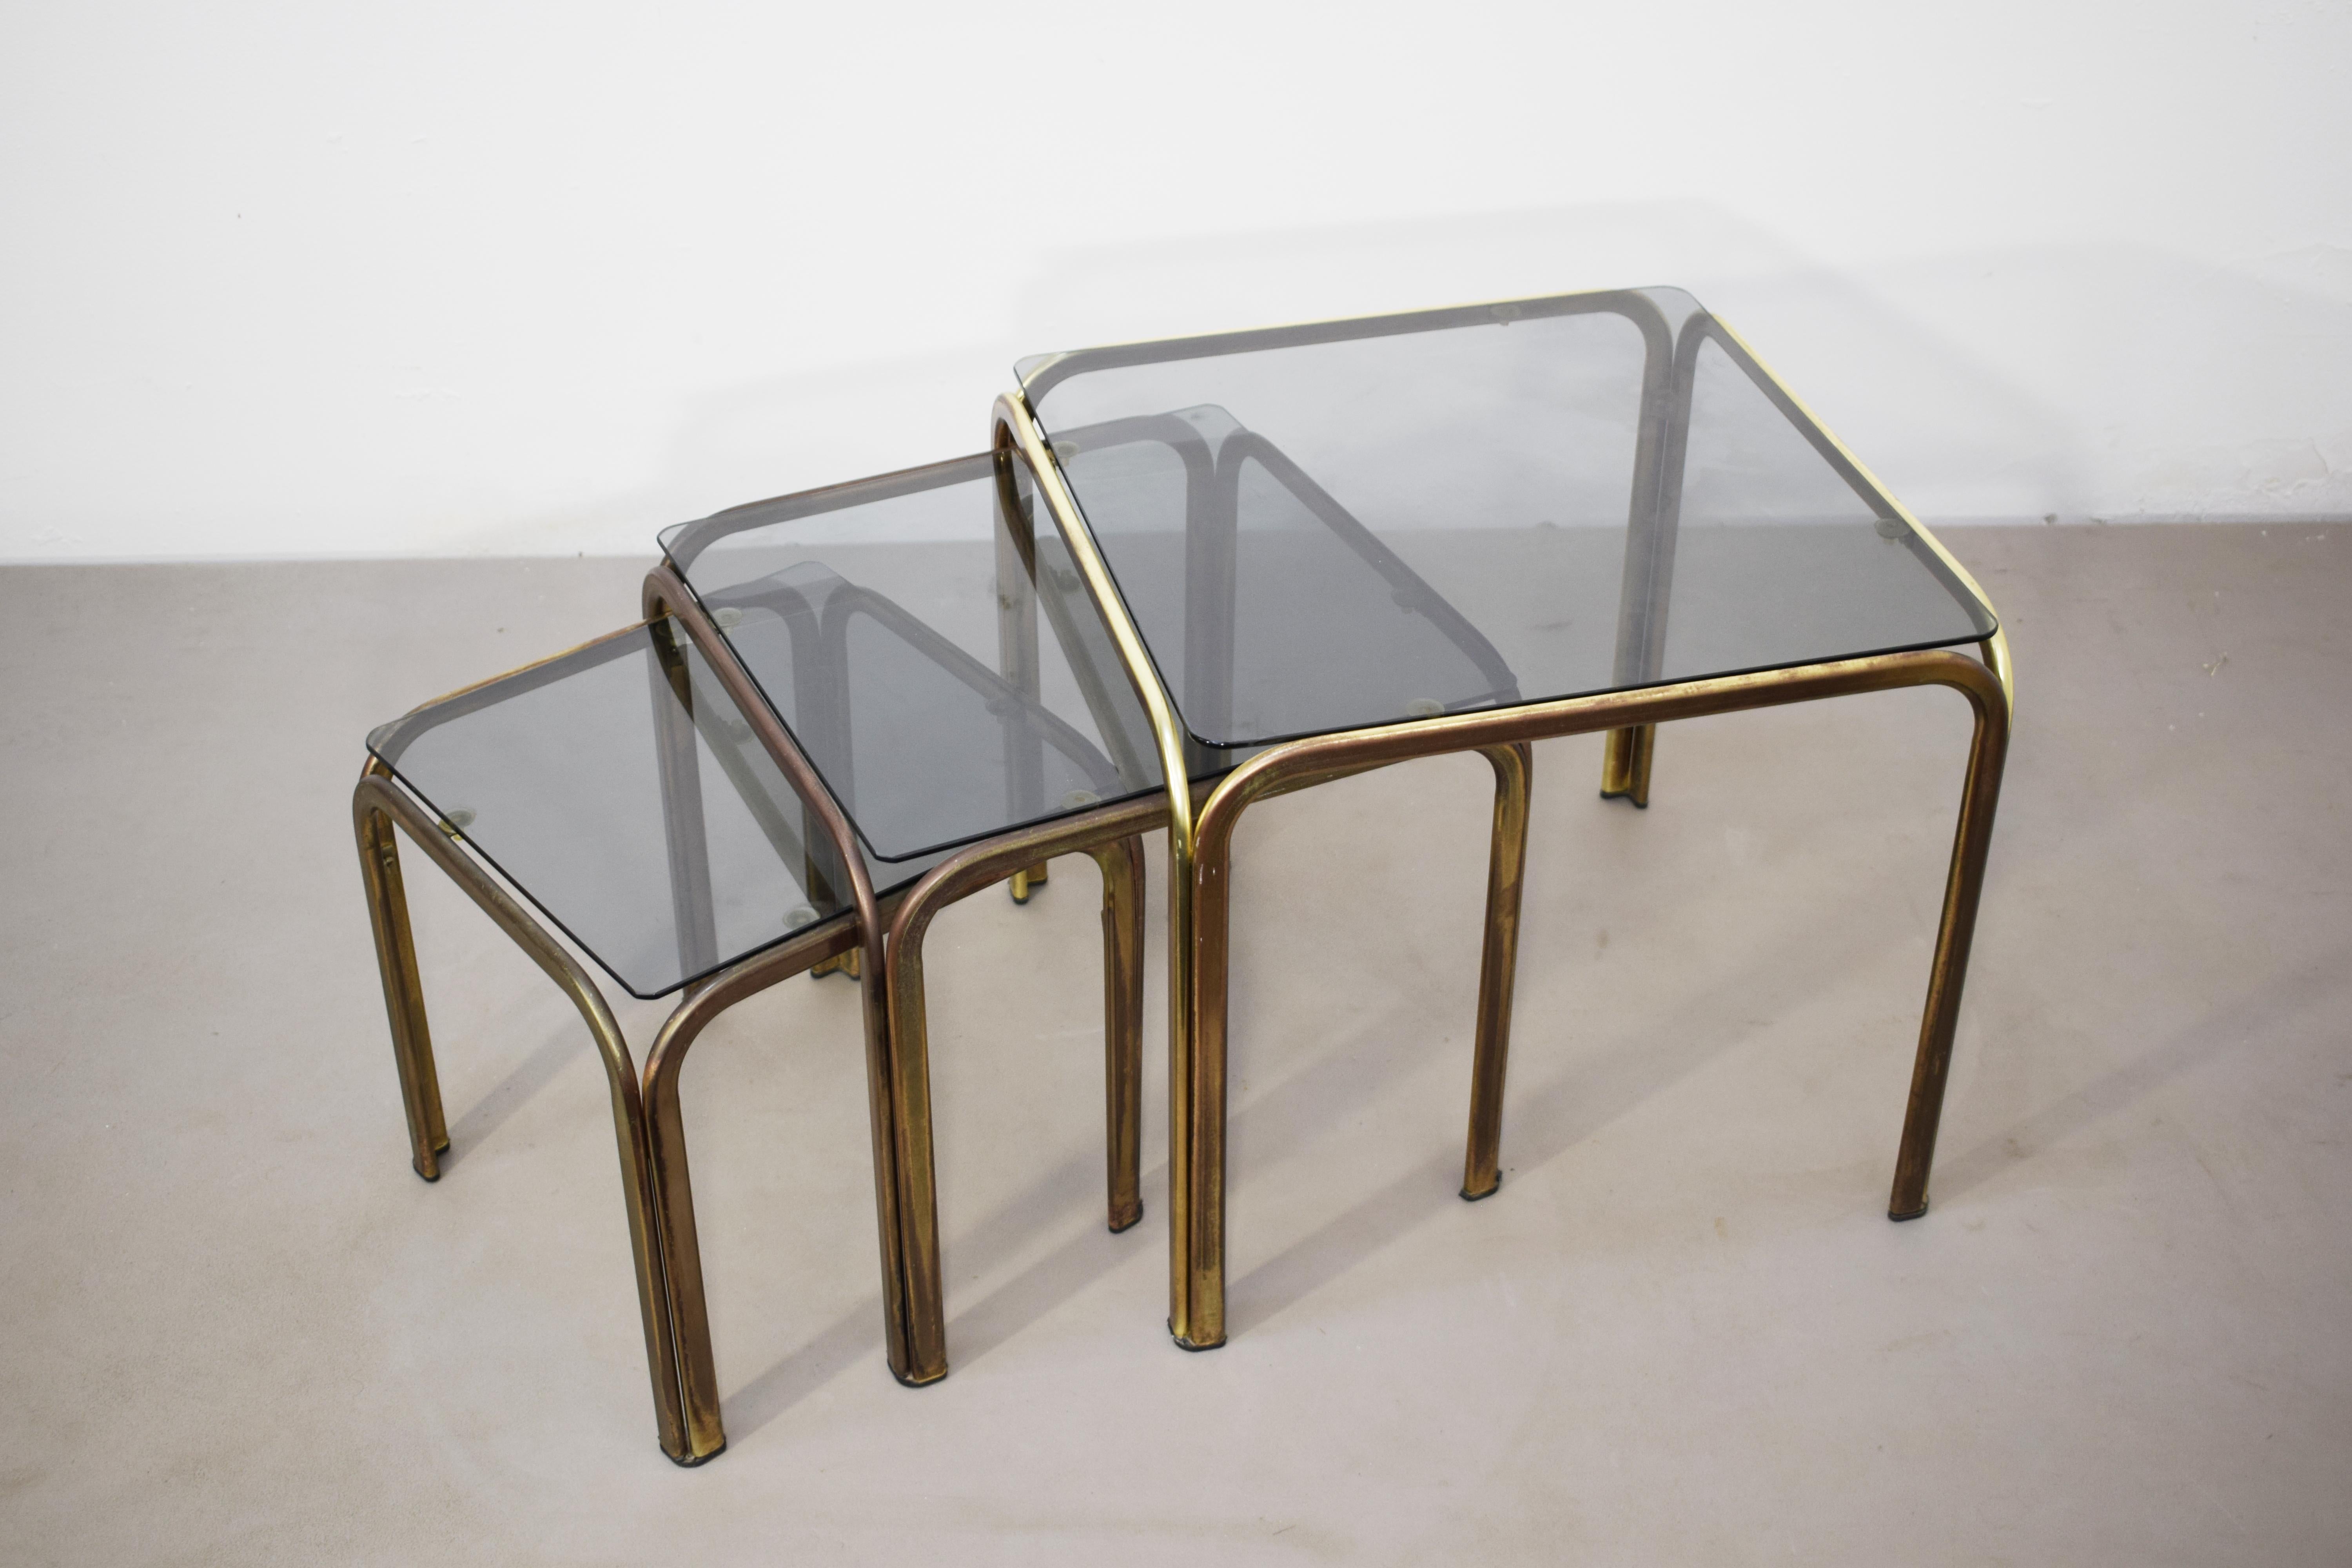 Set of 3 stackable coffee tables, brass and smoked glass, 1970s.
1) 47x47 H=41 cm;
2) 39x39 H= 38 cm;
3) 33x33 H=  31 cm.